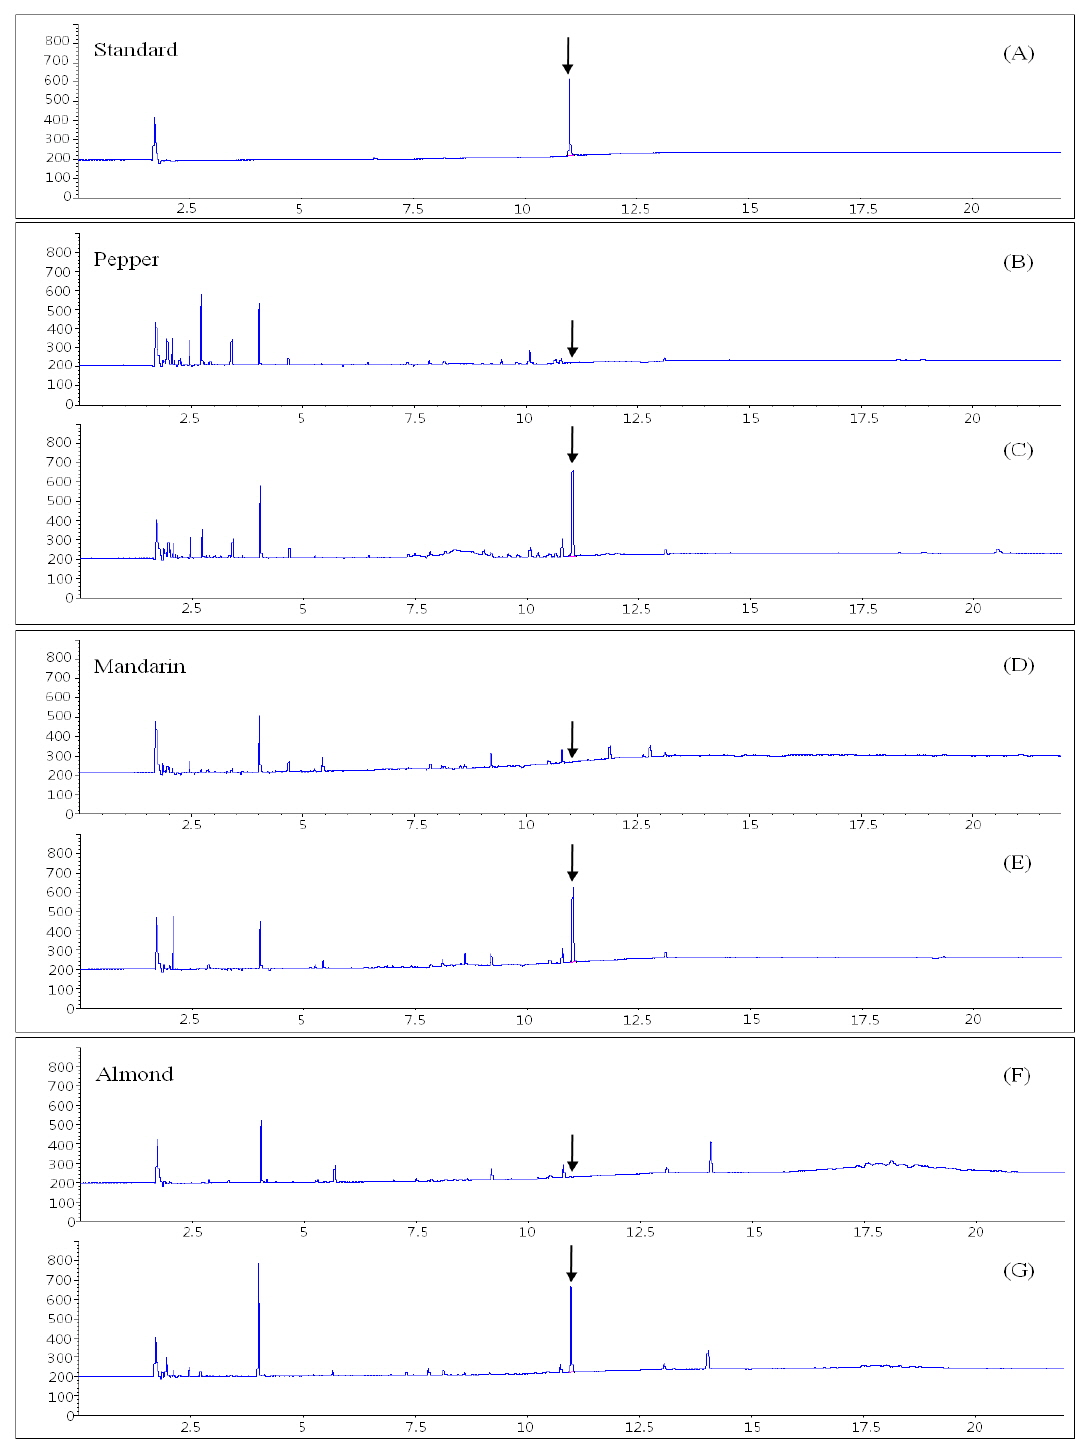 GC-ECD chromatograms of aclonifen in test crops. (A) 0.5 mg/kg standard, (B) pepper control, (C) fortified pepper sample, (D) mandarin control, (E) fortified mandarin sample, (F) almond control, (G) fortified almond sample.